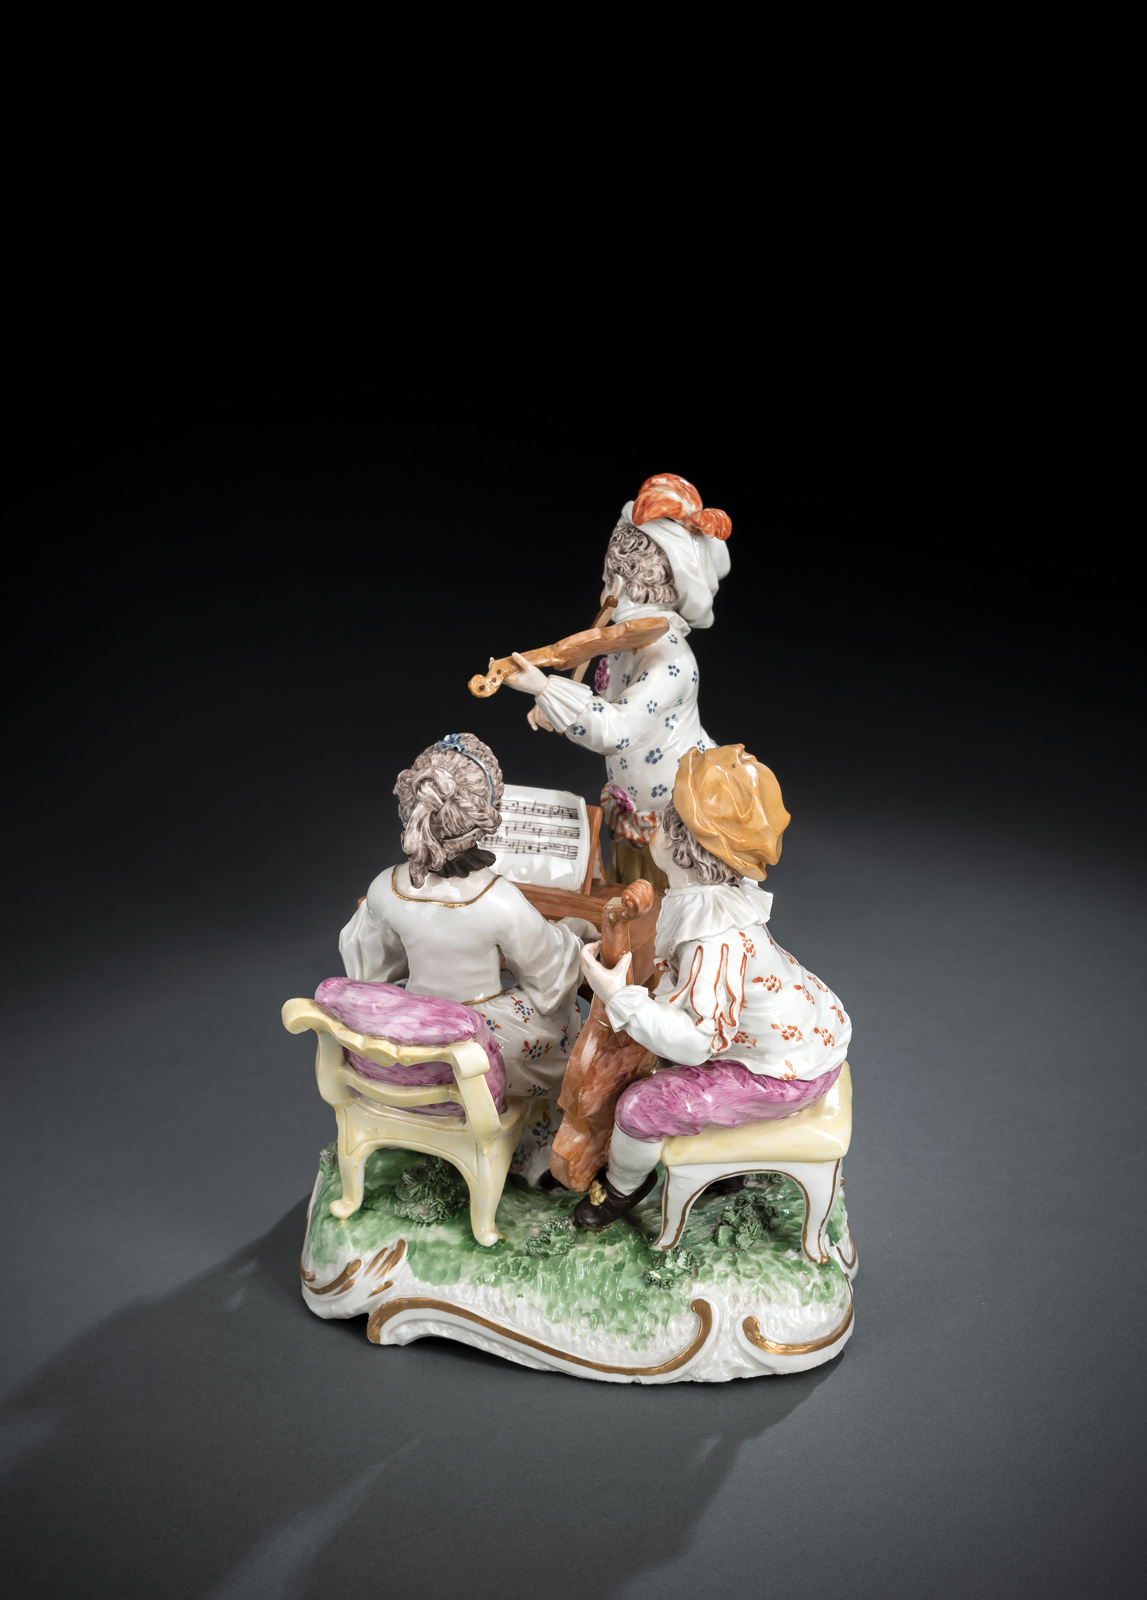 A FRANKENTHAL GROUP OF MUSIC MAKING CHILDREN "CHILDREN'S TRIO" - Image 2 of 4